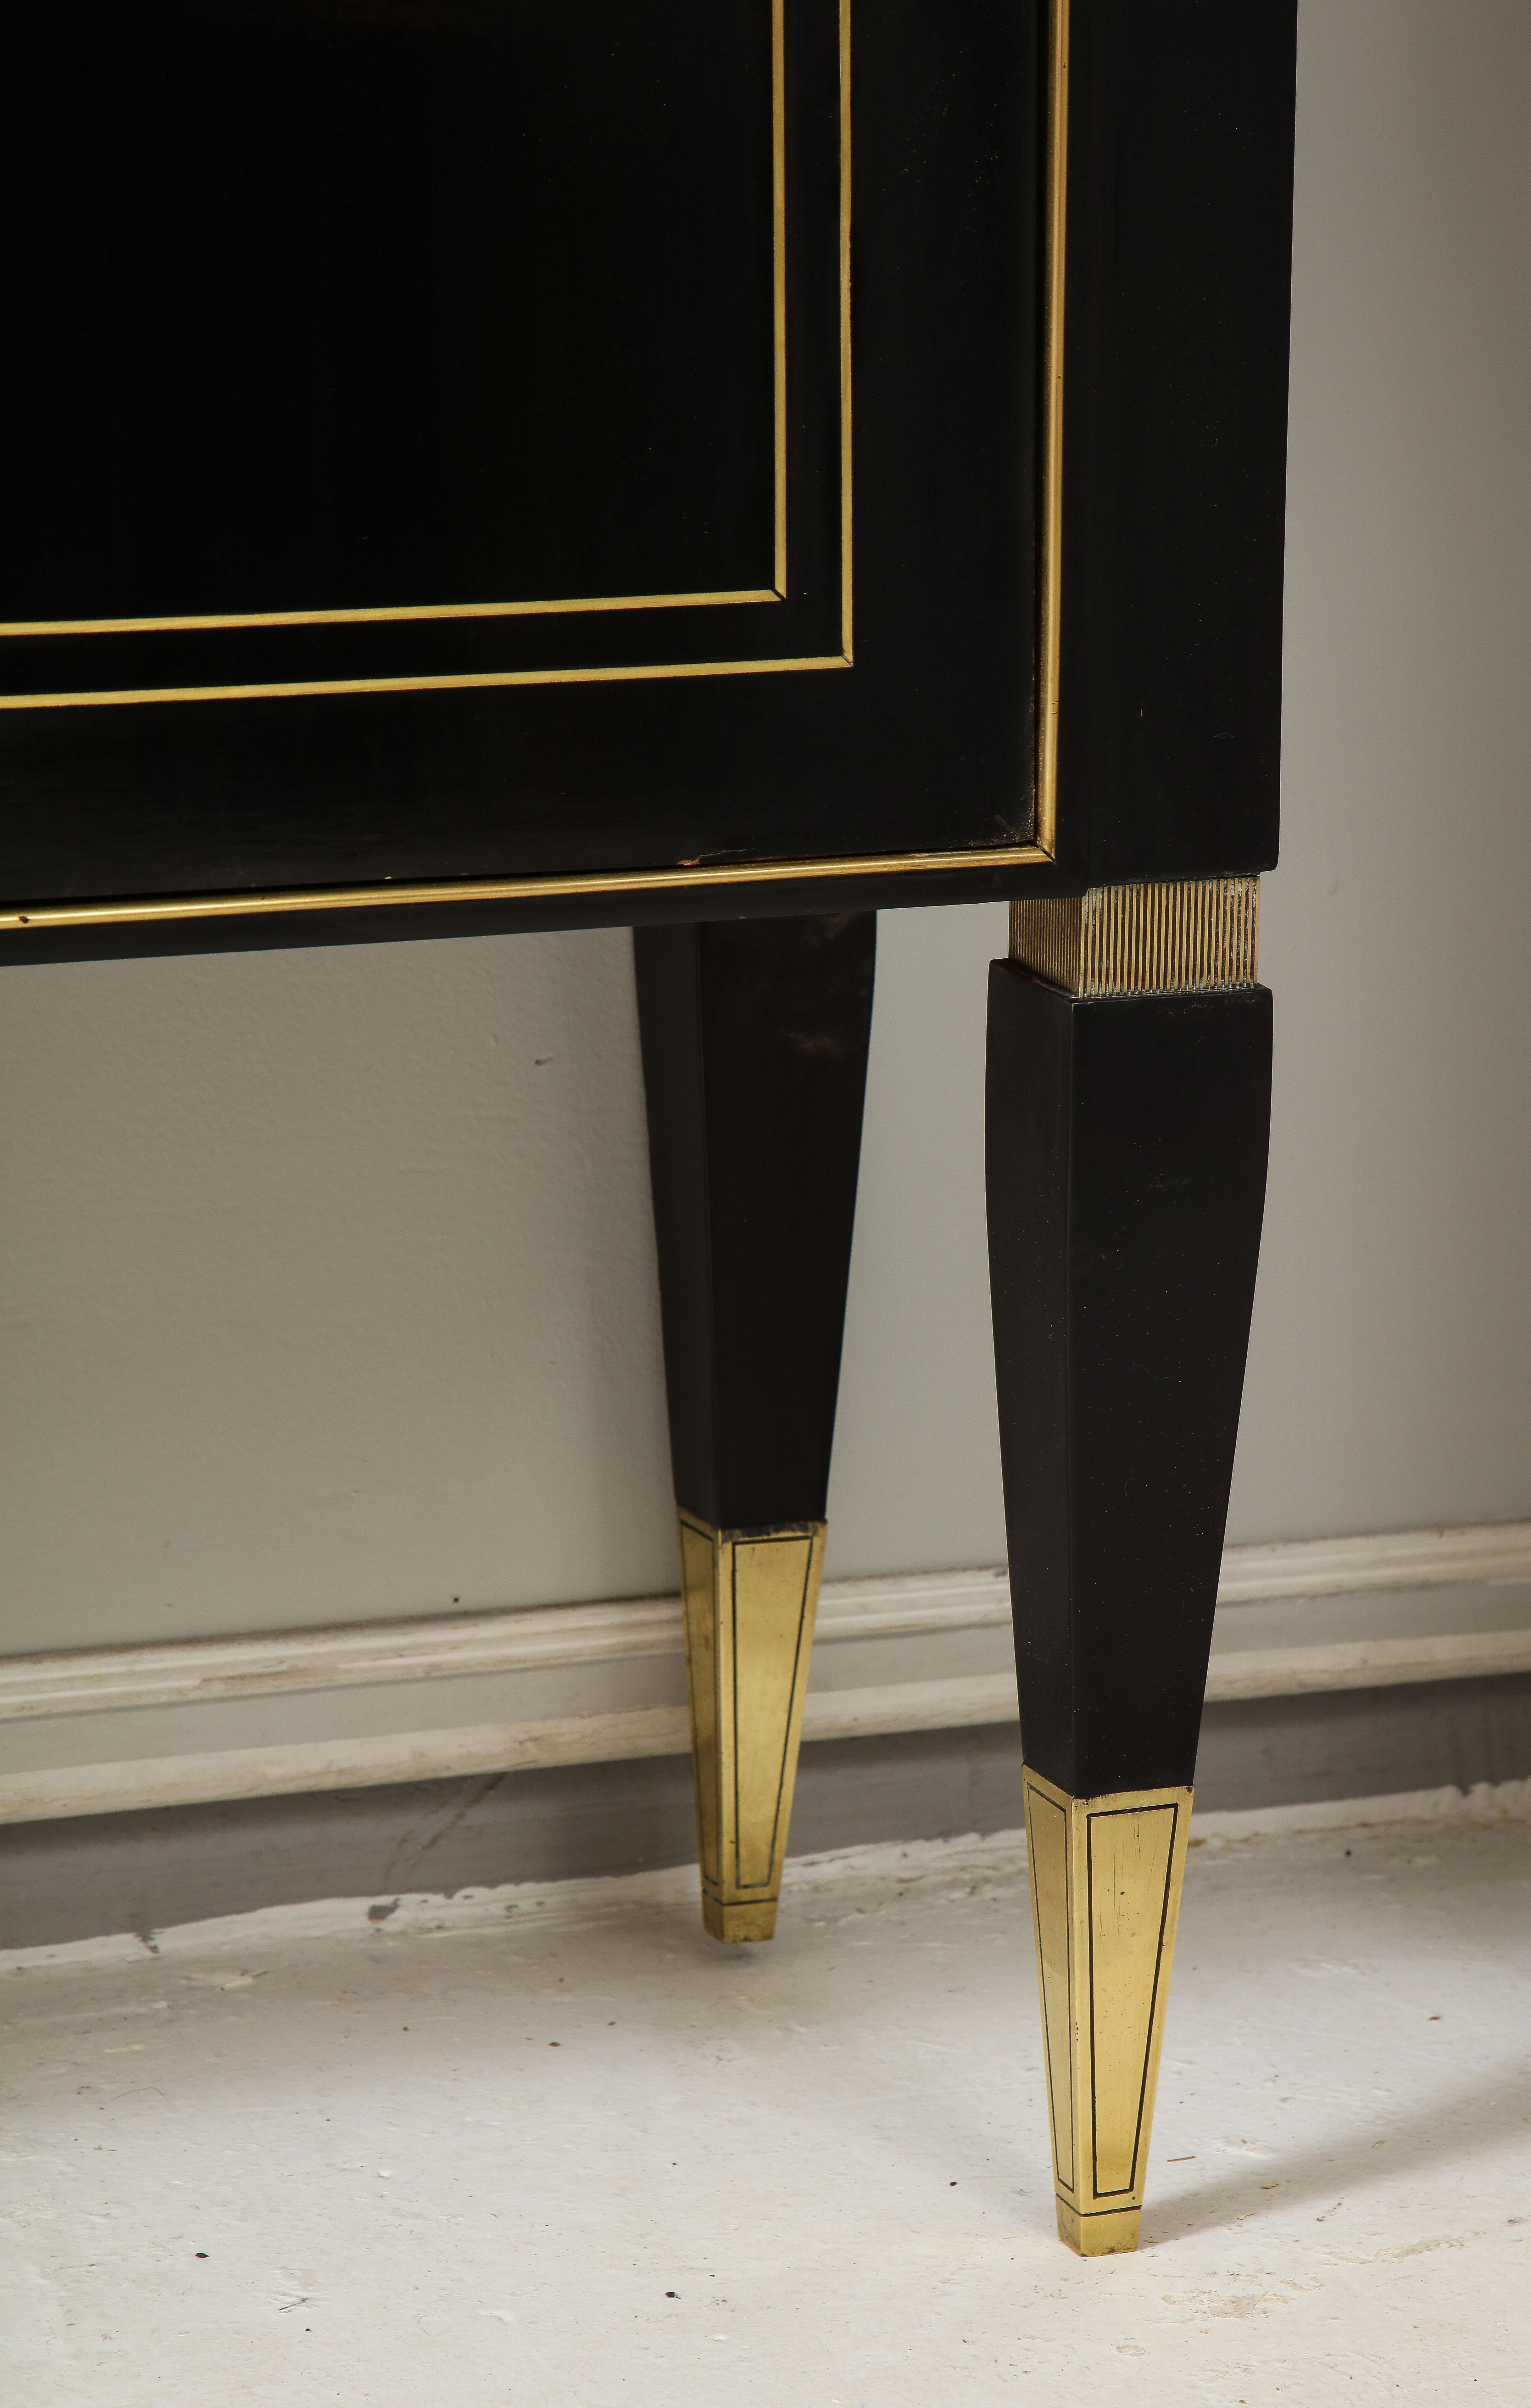 Mahogany Ebonized Cabinet with Brass-Inlays on Tapered Legs